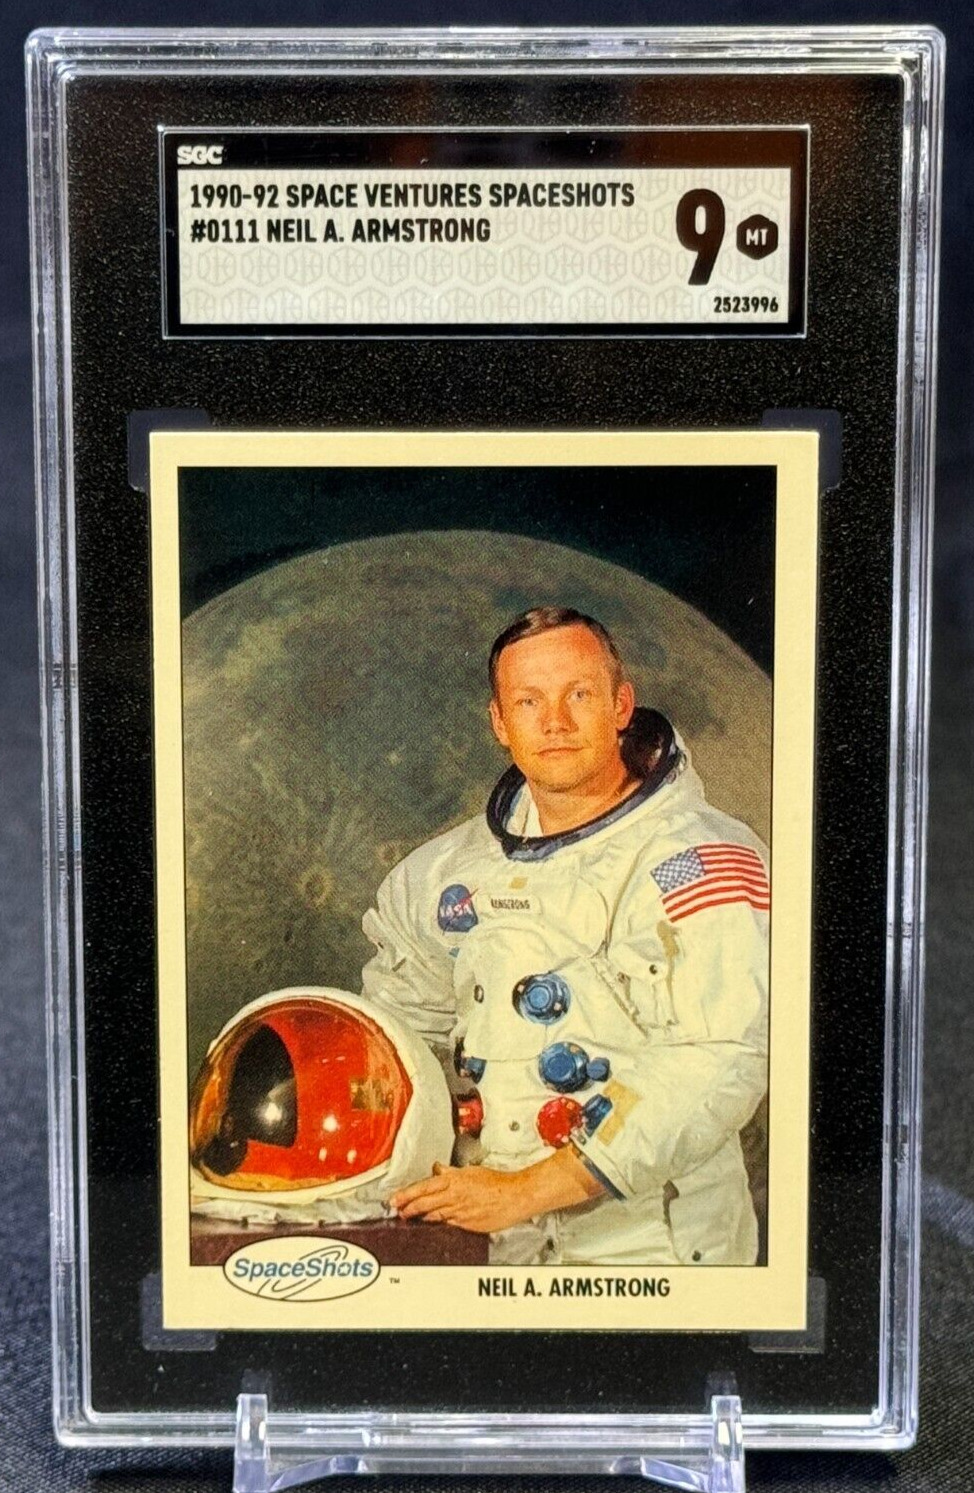 Neil A. Armstrong 1990-92 Space Ventures Spaceshots NASA #0111 SGC 9 MINT